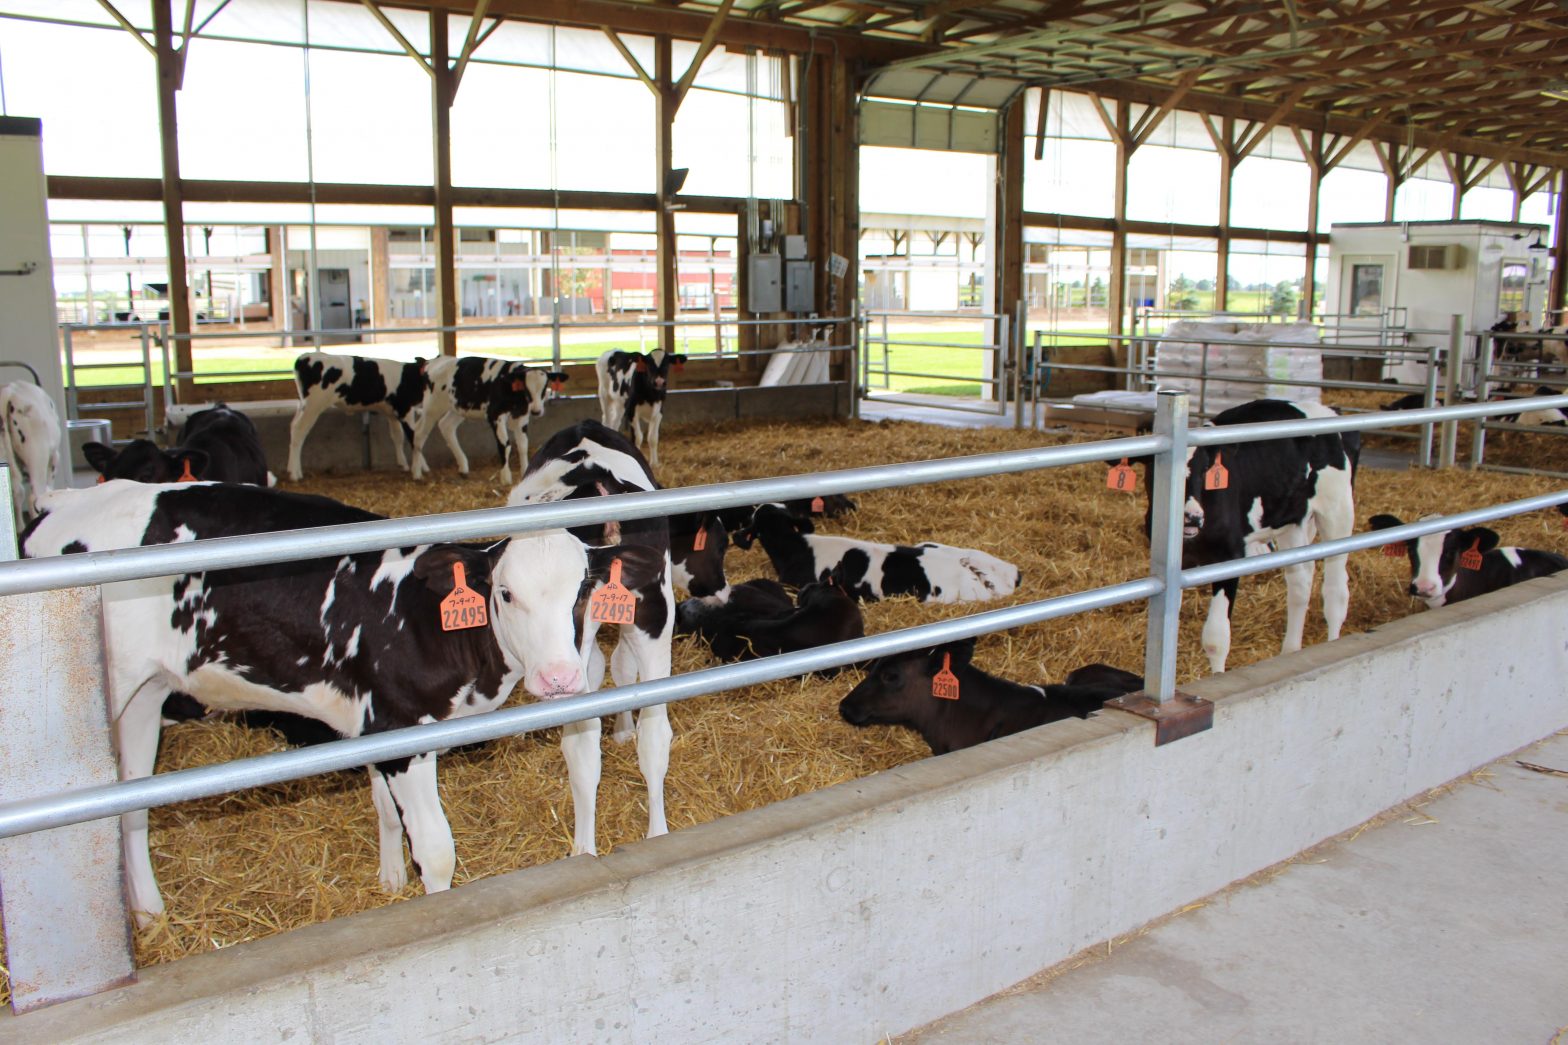 At JDR Farms, LLC in Marlette, Michigan, Jeff and Dannielle Root annually raise about 1,040 heifers from newborns to 115 days of age.  Pre-weaned heifers are kept in pens of 20 and fed with autofeeders for 60 days.